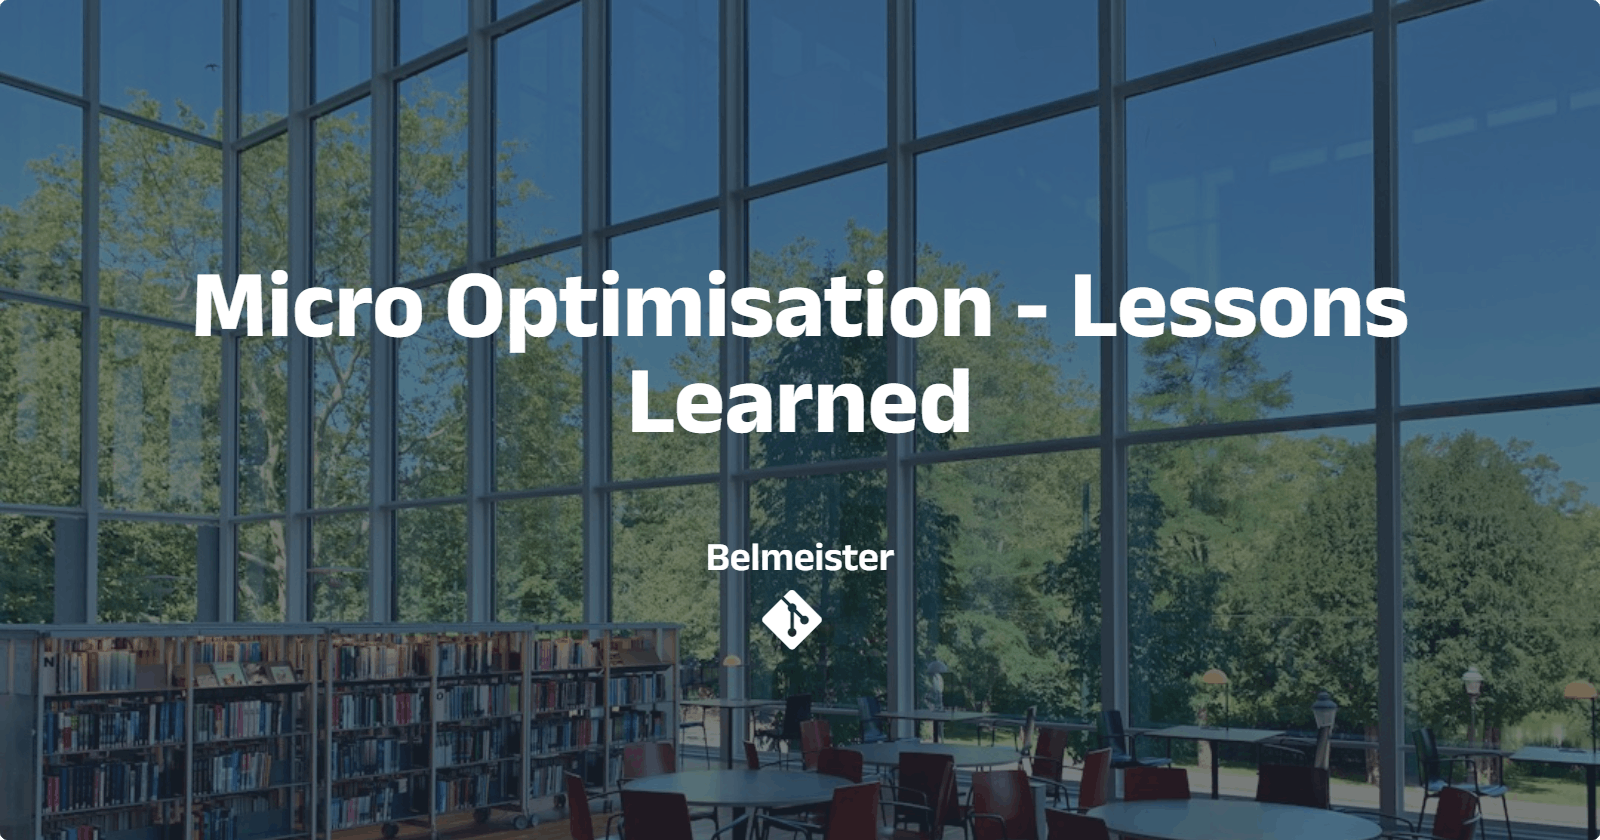 Micro Optimisation - Lessons Learned